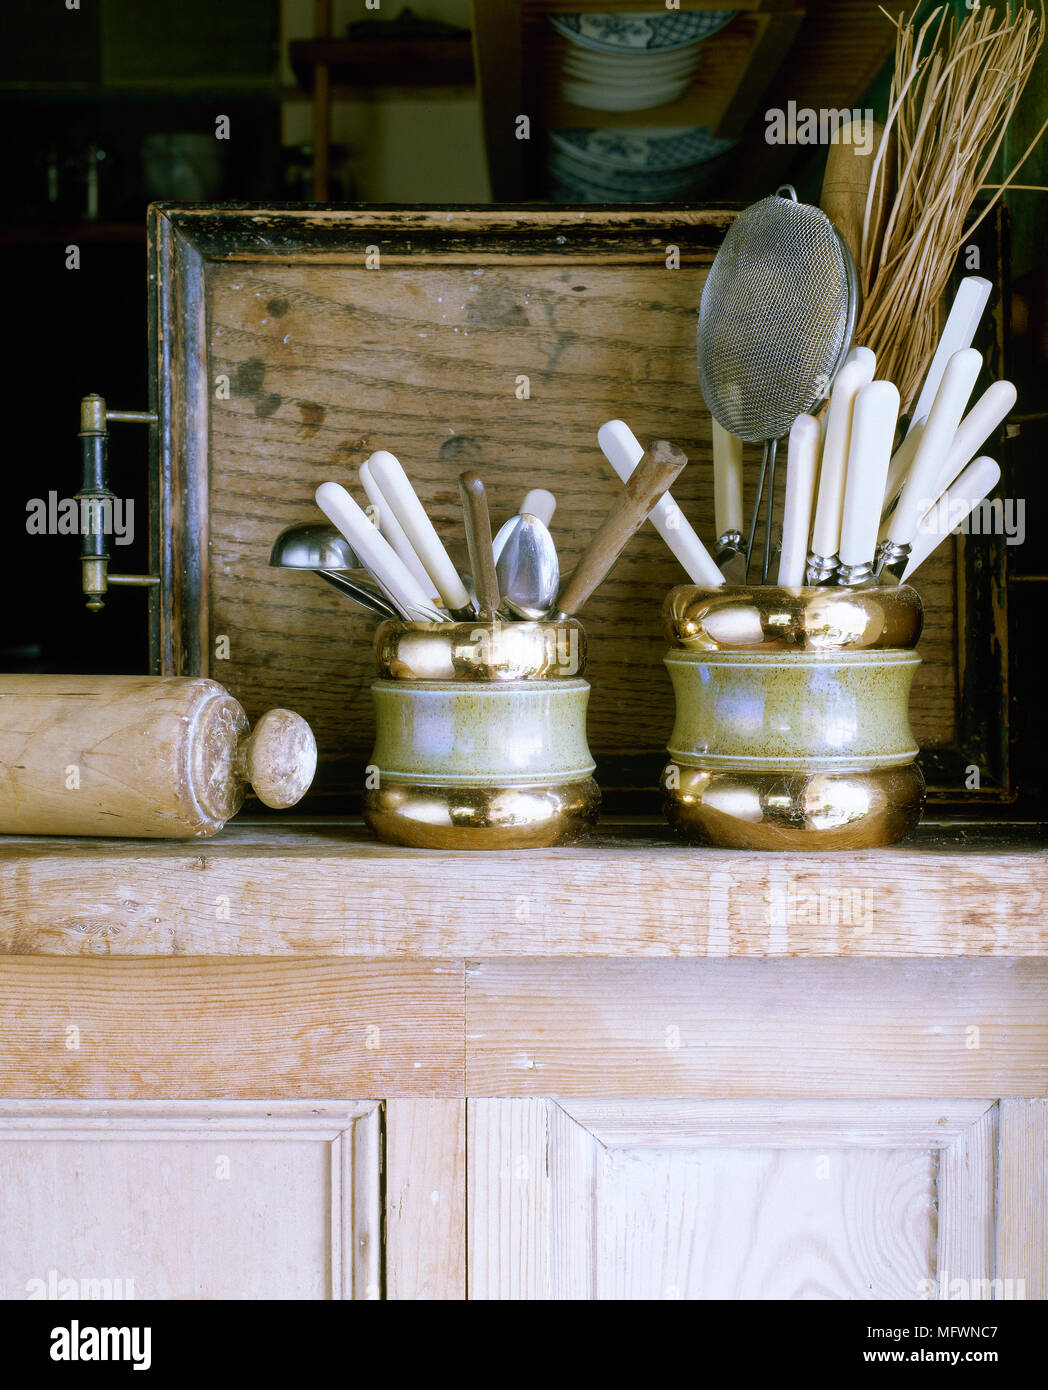 https://c8.alamy.com/comp/MFWNC7/detail-of-a-distressed-wood-cabinet-topped-with-kitchen-utensils-in-antique-containers-MFWNC7.jpg